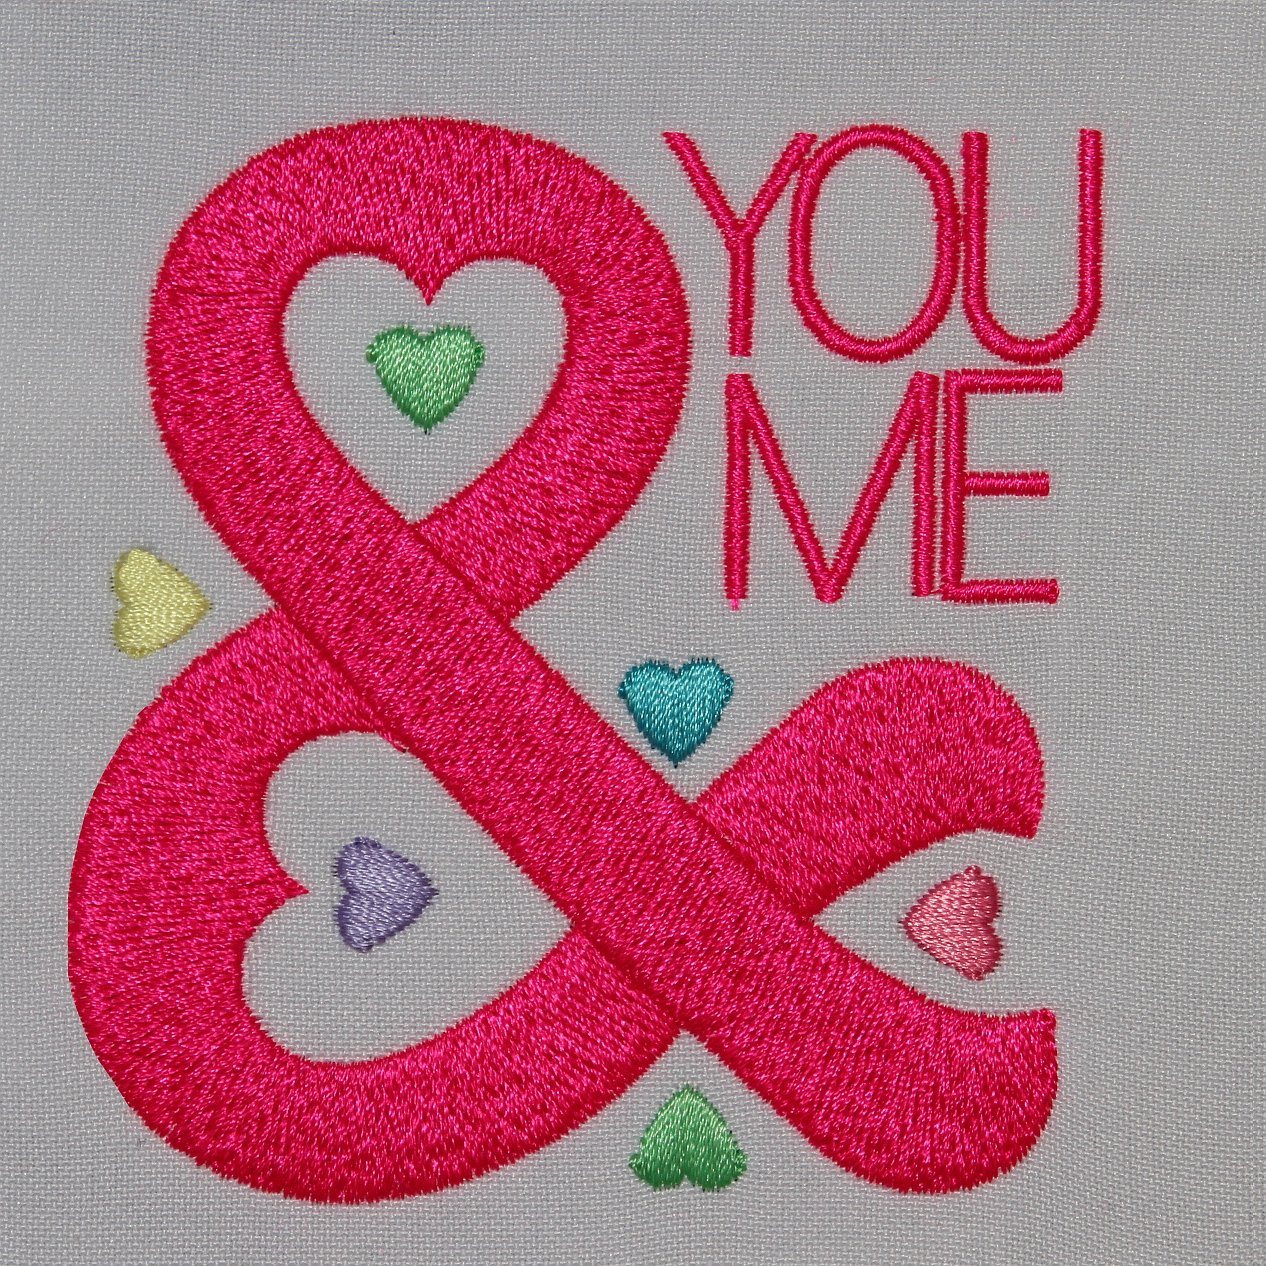 You and me with hearts